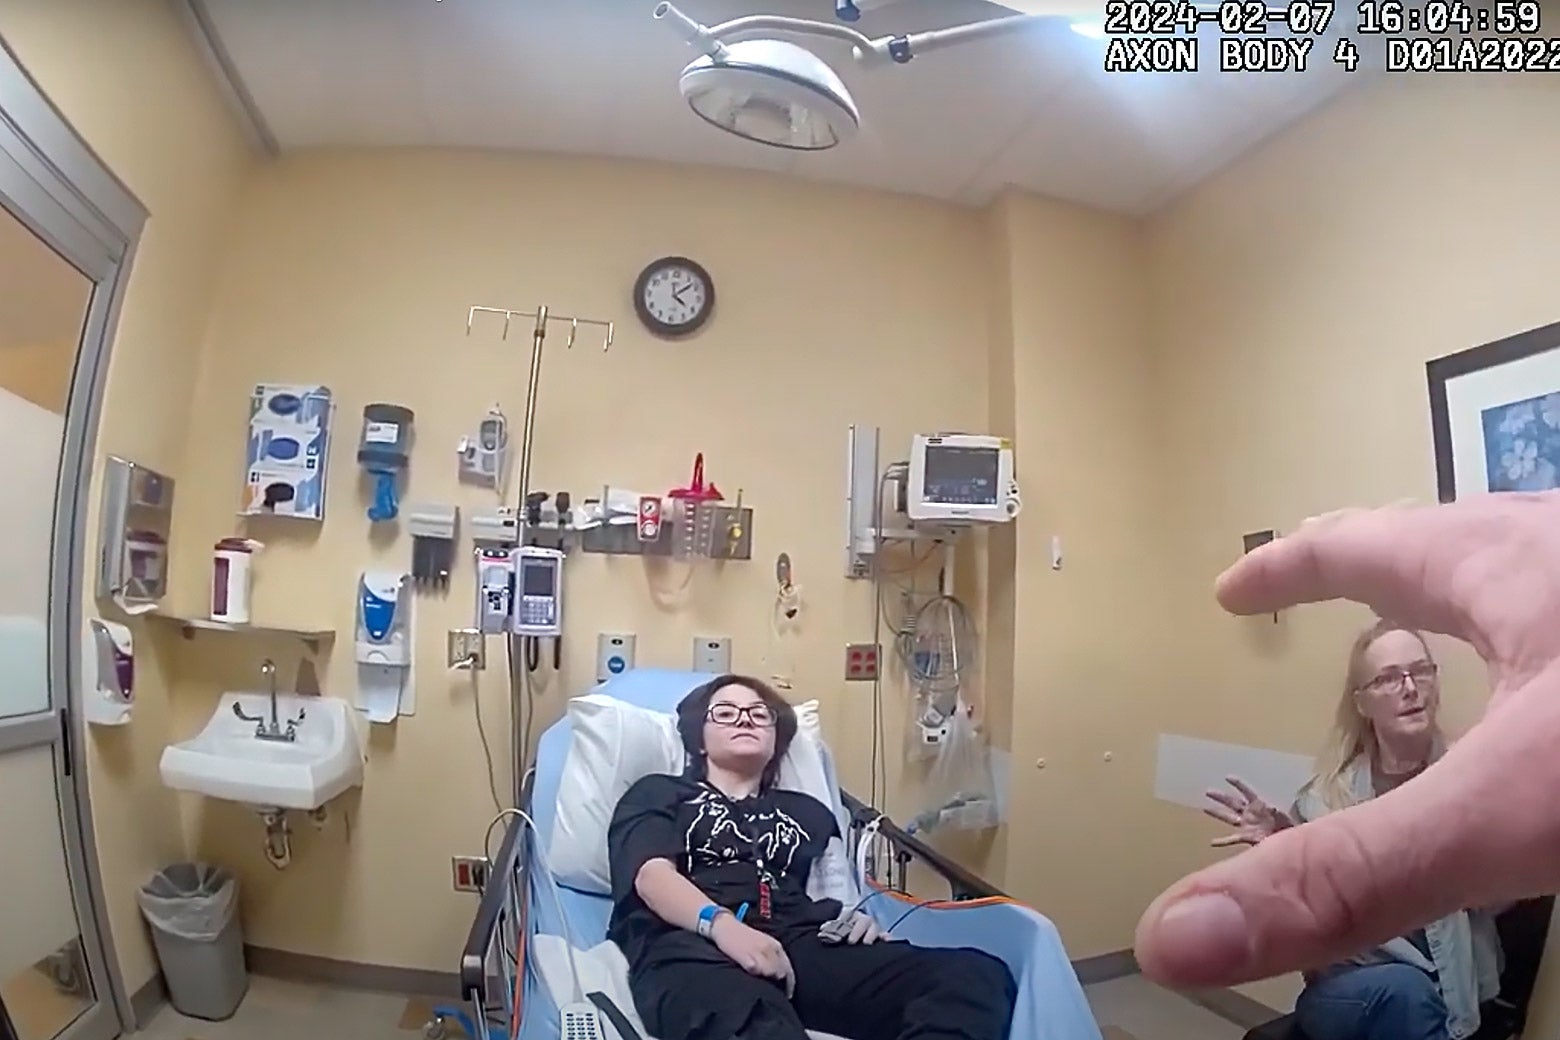 Nex Benedict is seen through a police body camera sitting back on a hospital bed. Nex is wearing all black and a woman sits nearby speaking to the officer, whose hand is in the frame. 